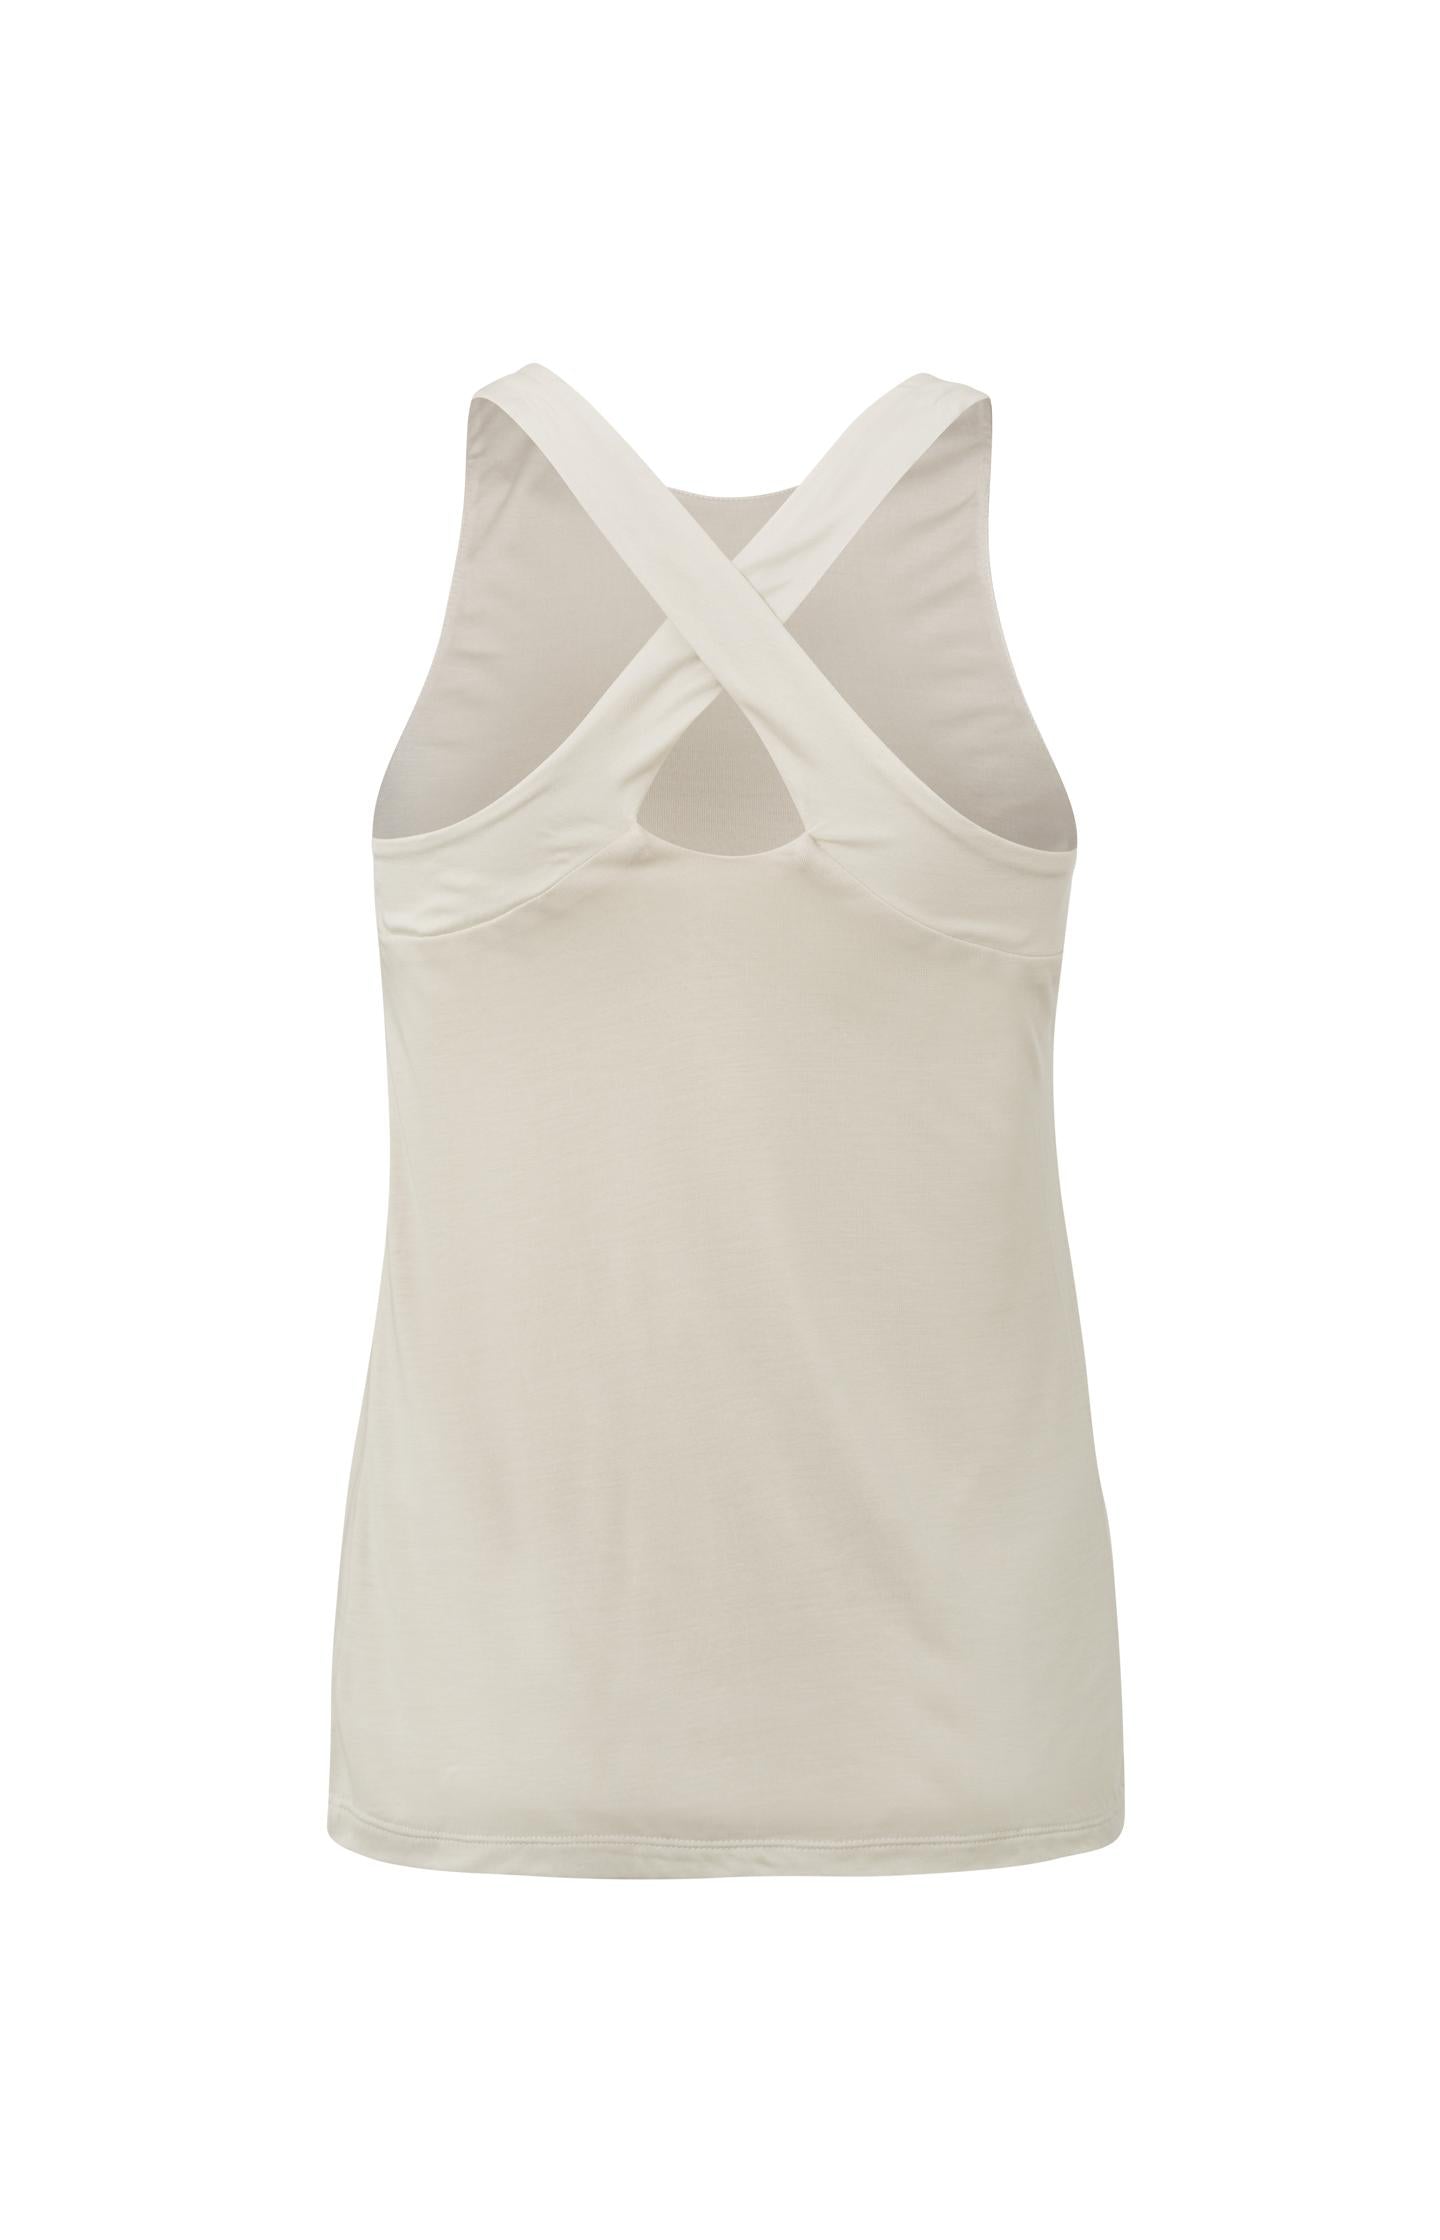 Singlet with round neck and crossed straps on back